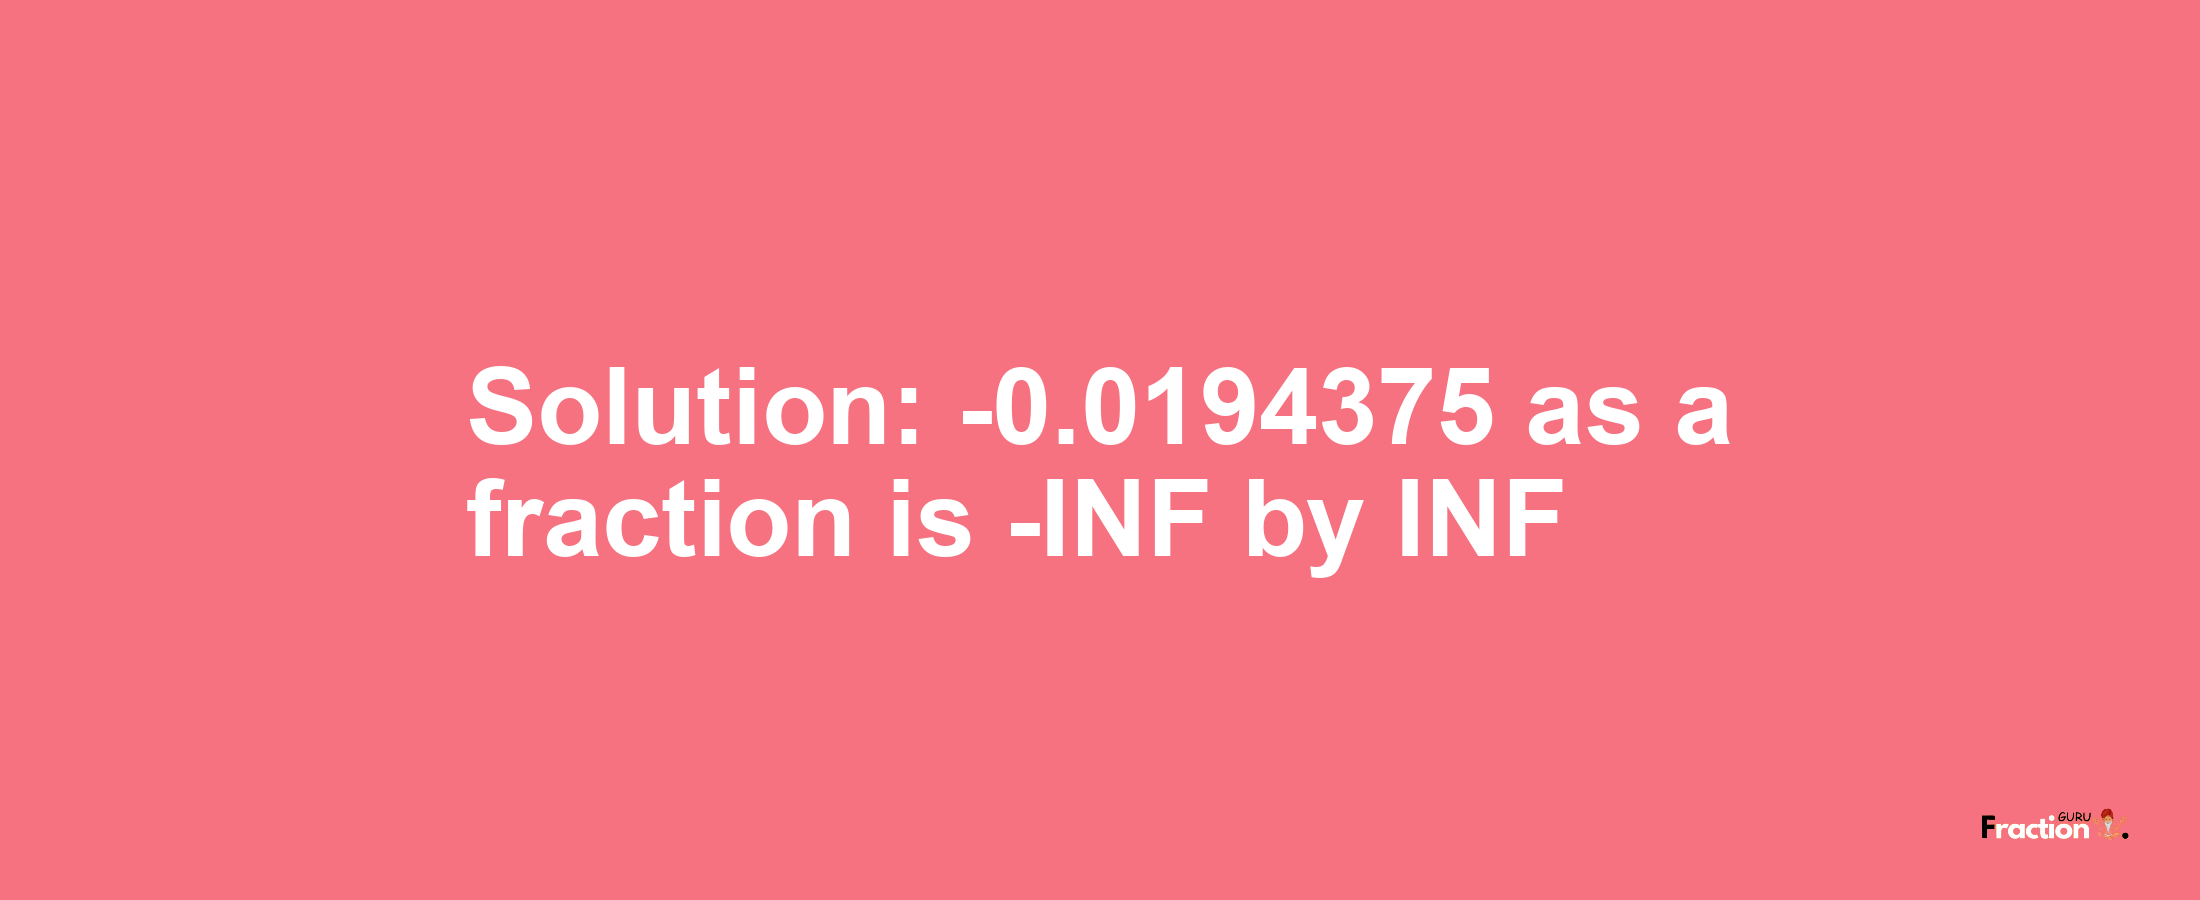 Solution:-0.0194375 as a fraction is -INF/INF